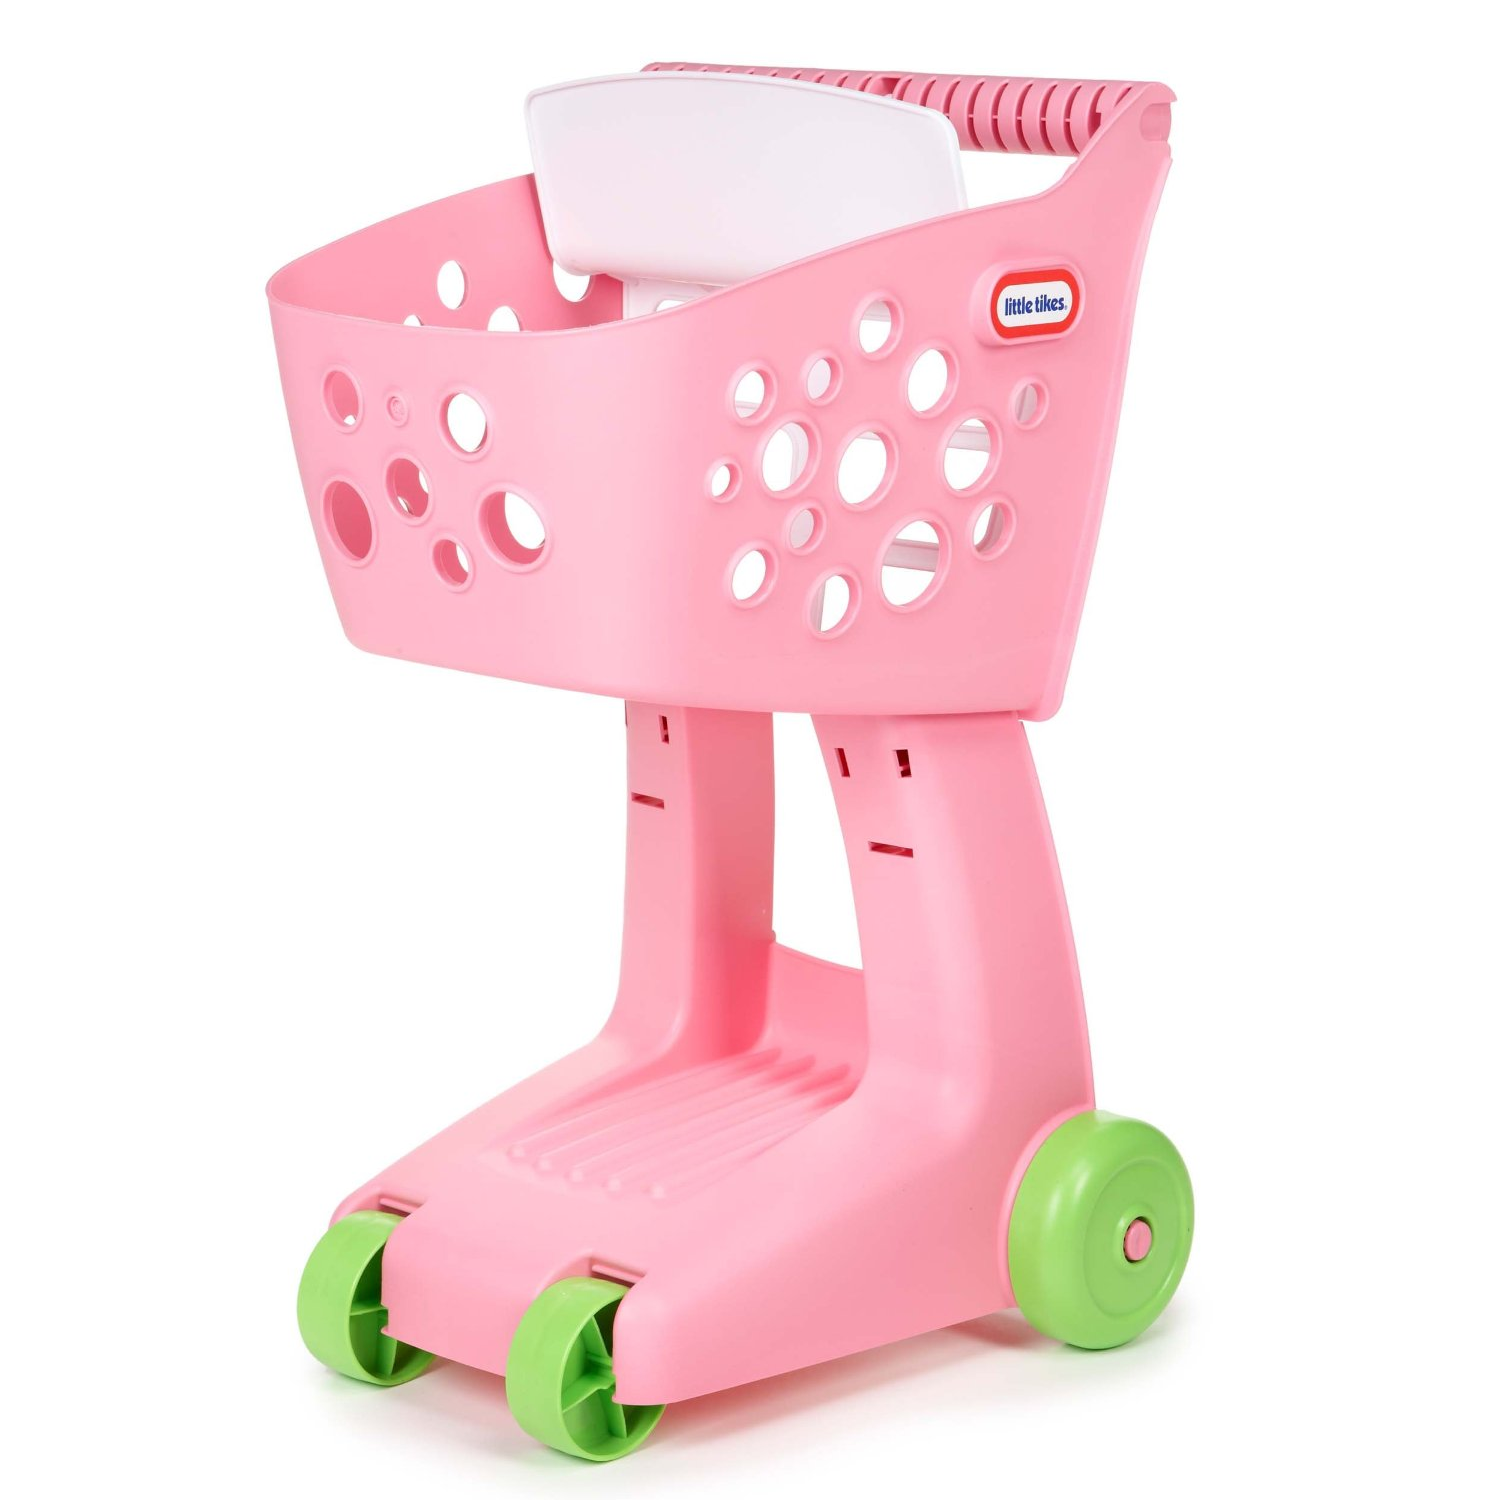 Little Tikes Lil’ Shopper Toy (Pink) Only $16.99 on Amazon!